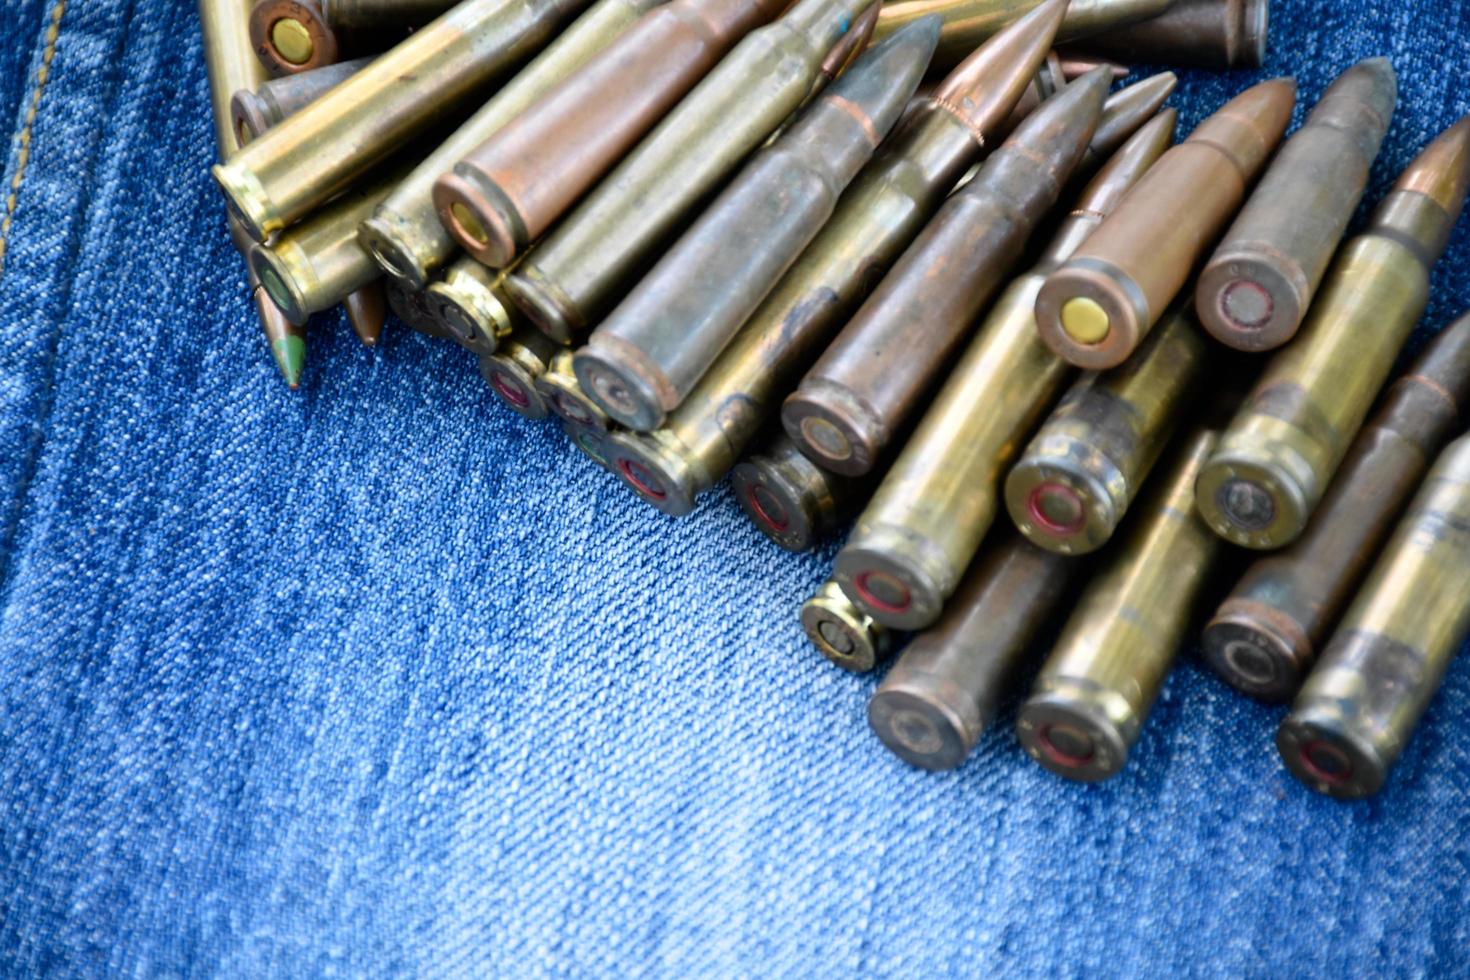 Closeup view of the old bullets on jeans floor, soft and selective focus on bullets, concept for collecting old bullets in free times. photo